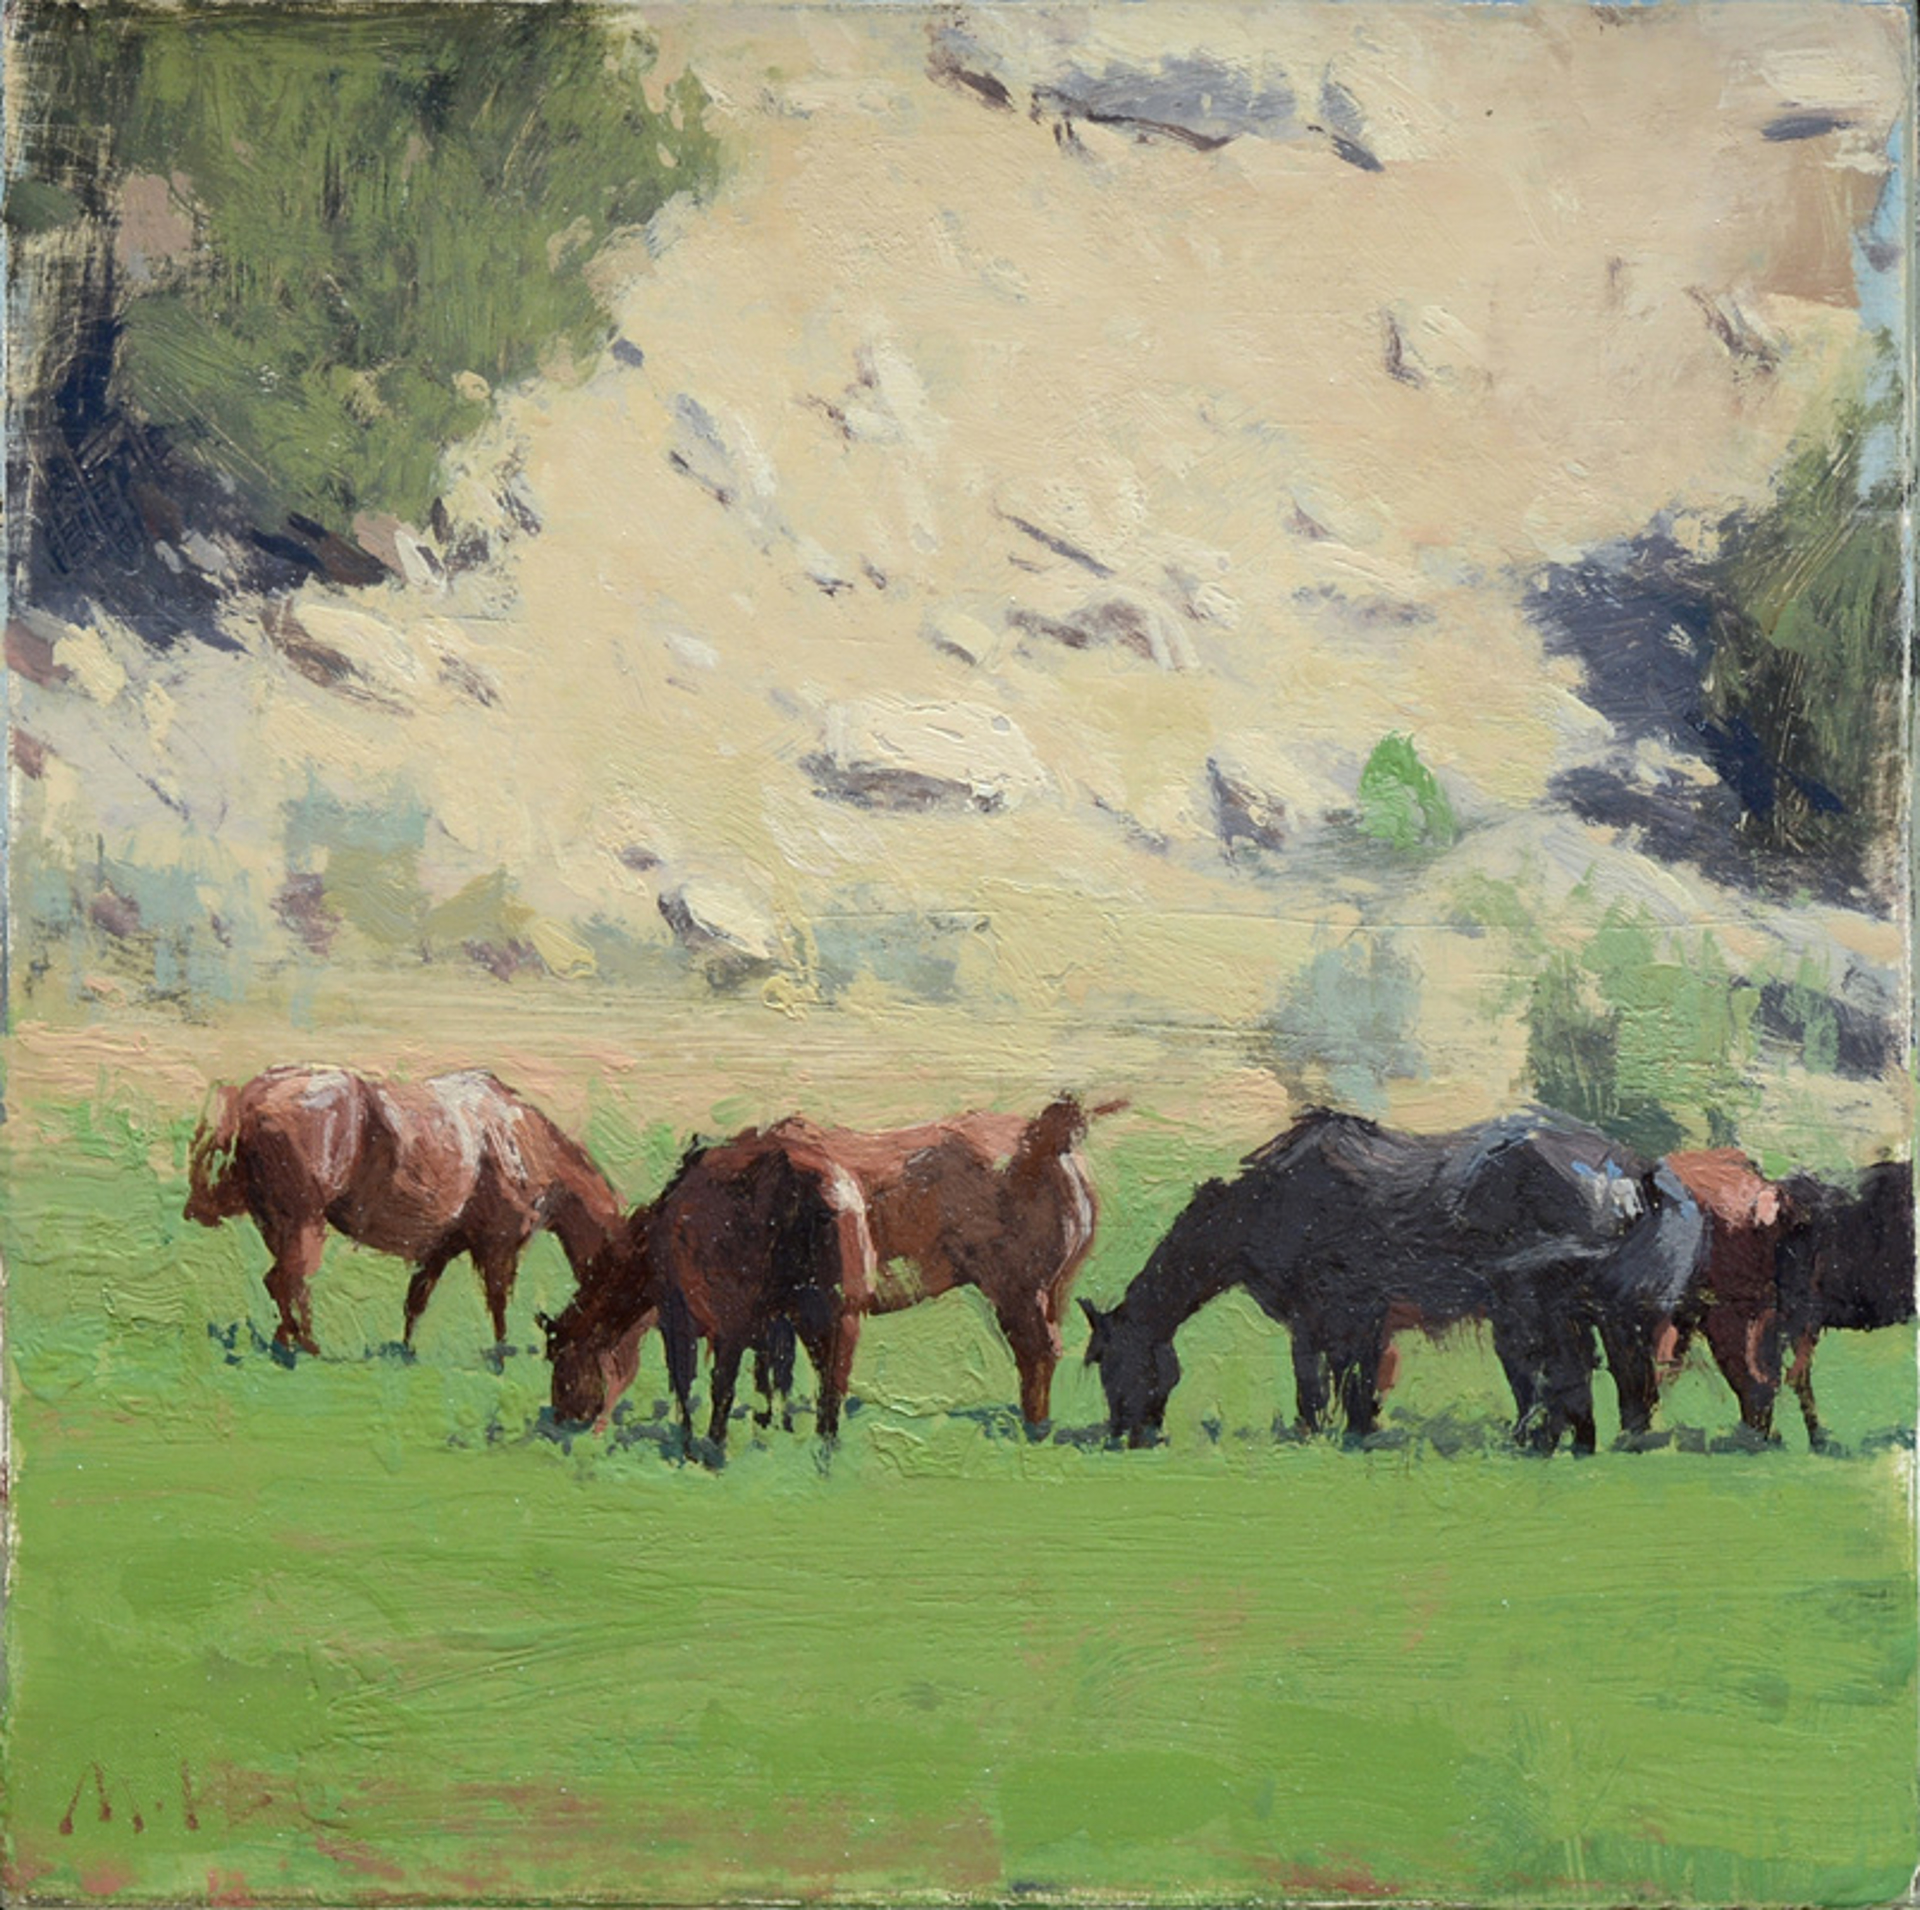 Canyon Horses I by Michael Workman